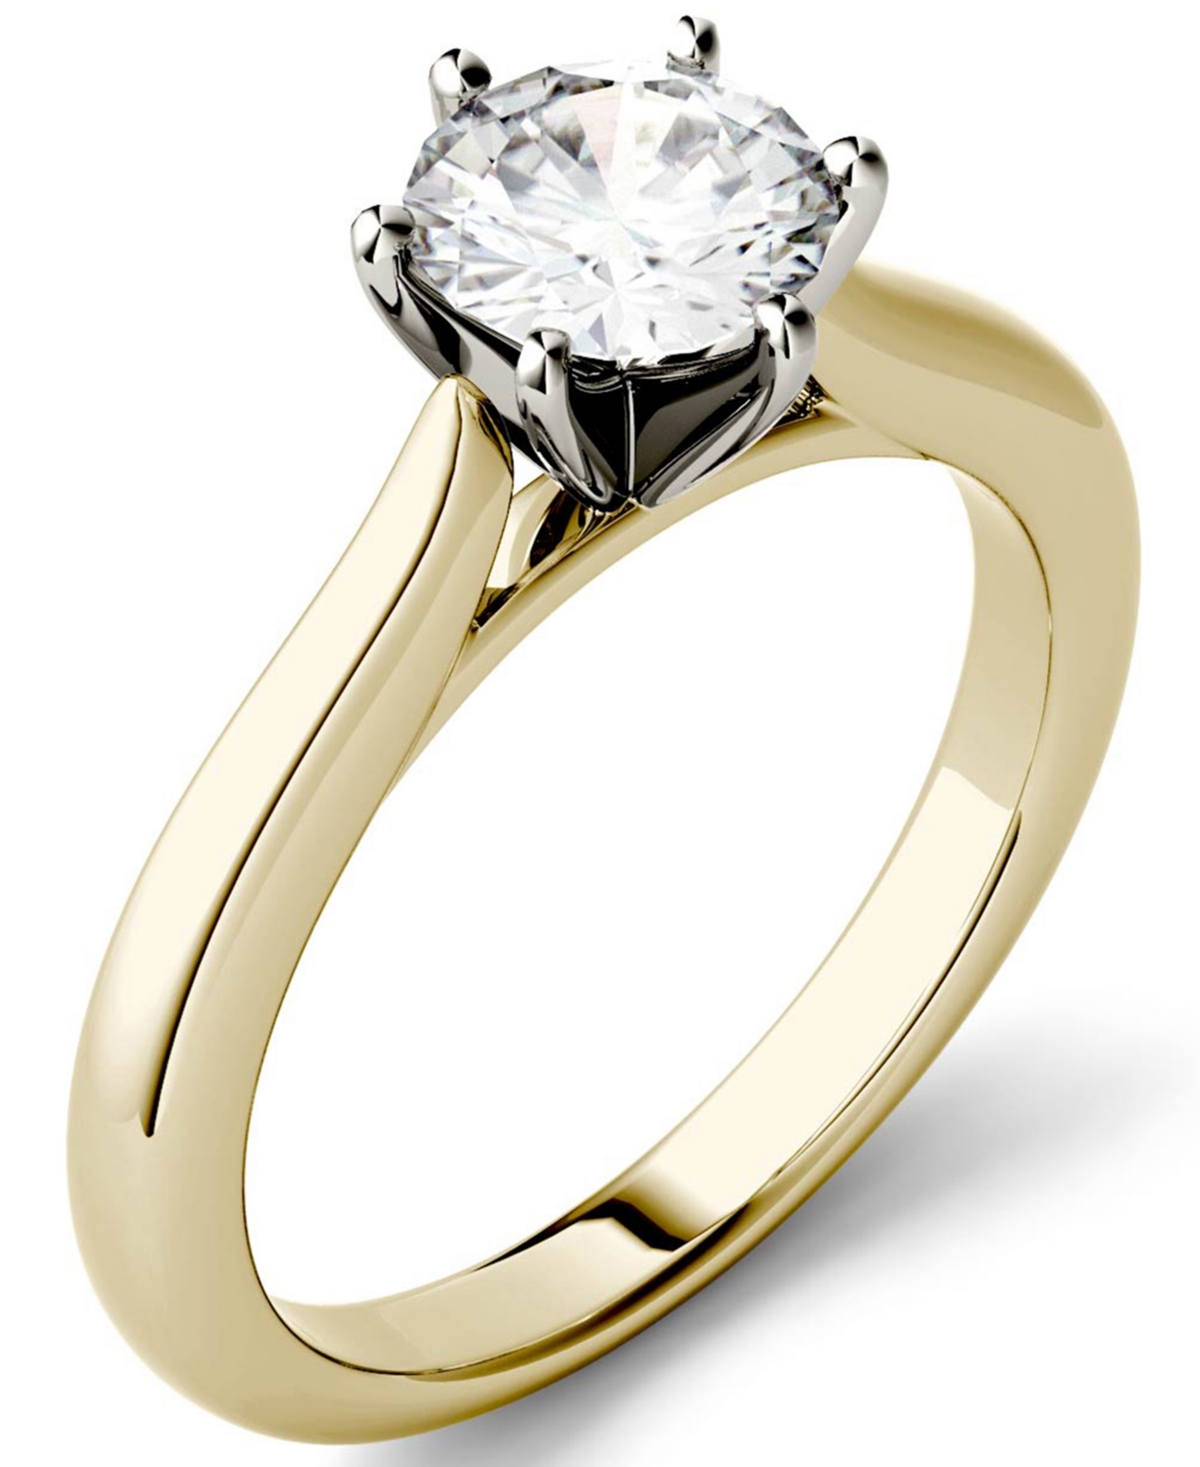 Charles & Colvard Moissanite Solitaire Engagement Ring 1 ct. t.w. Diamond Equivalent in 14k White Gold or 14k Yellow Gold